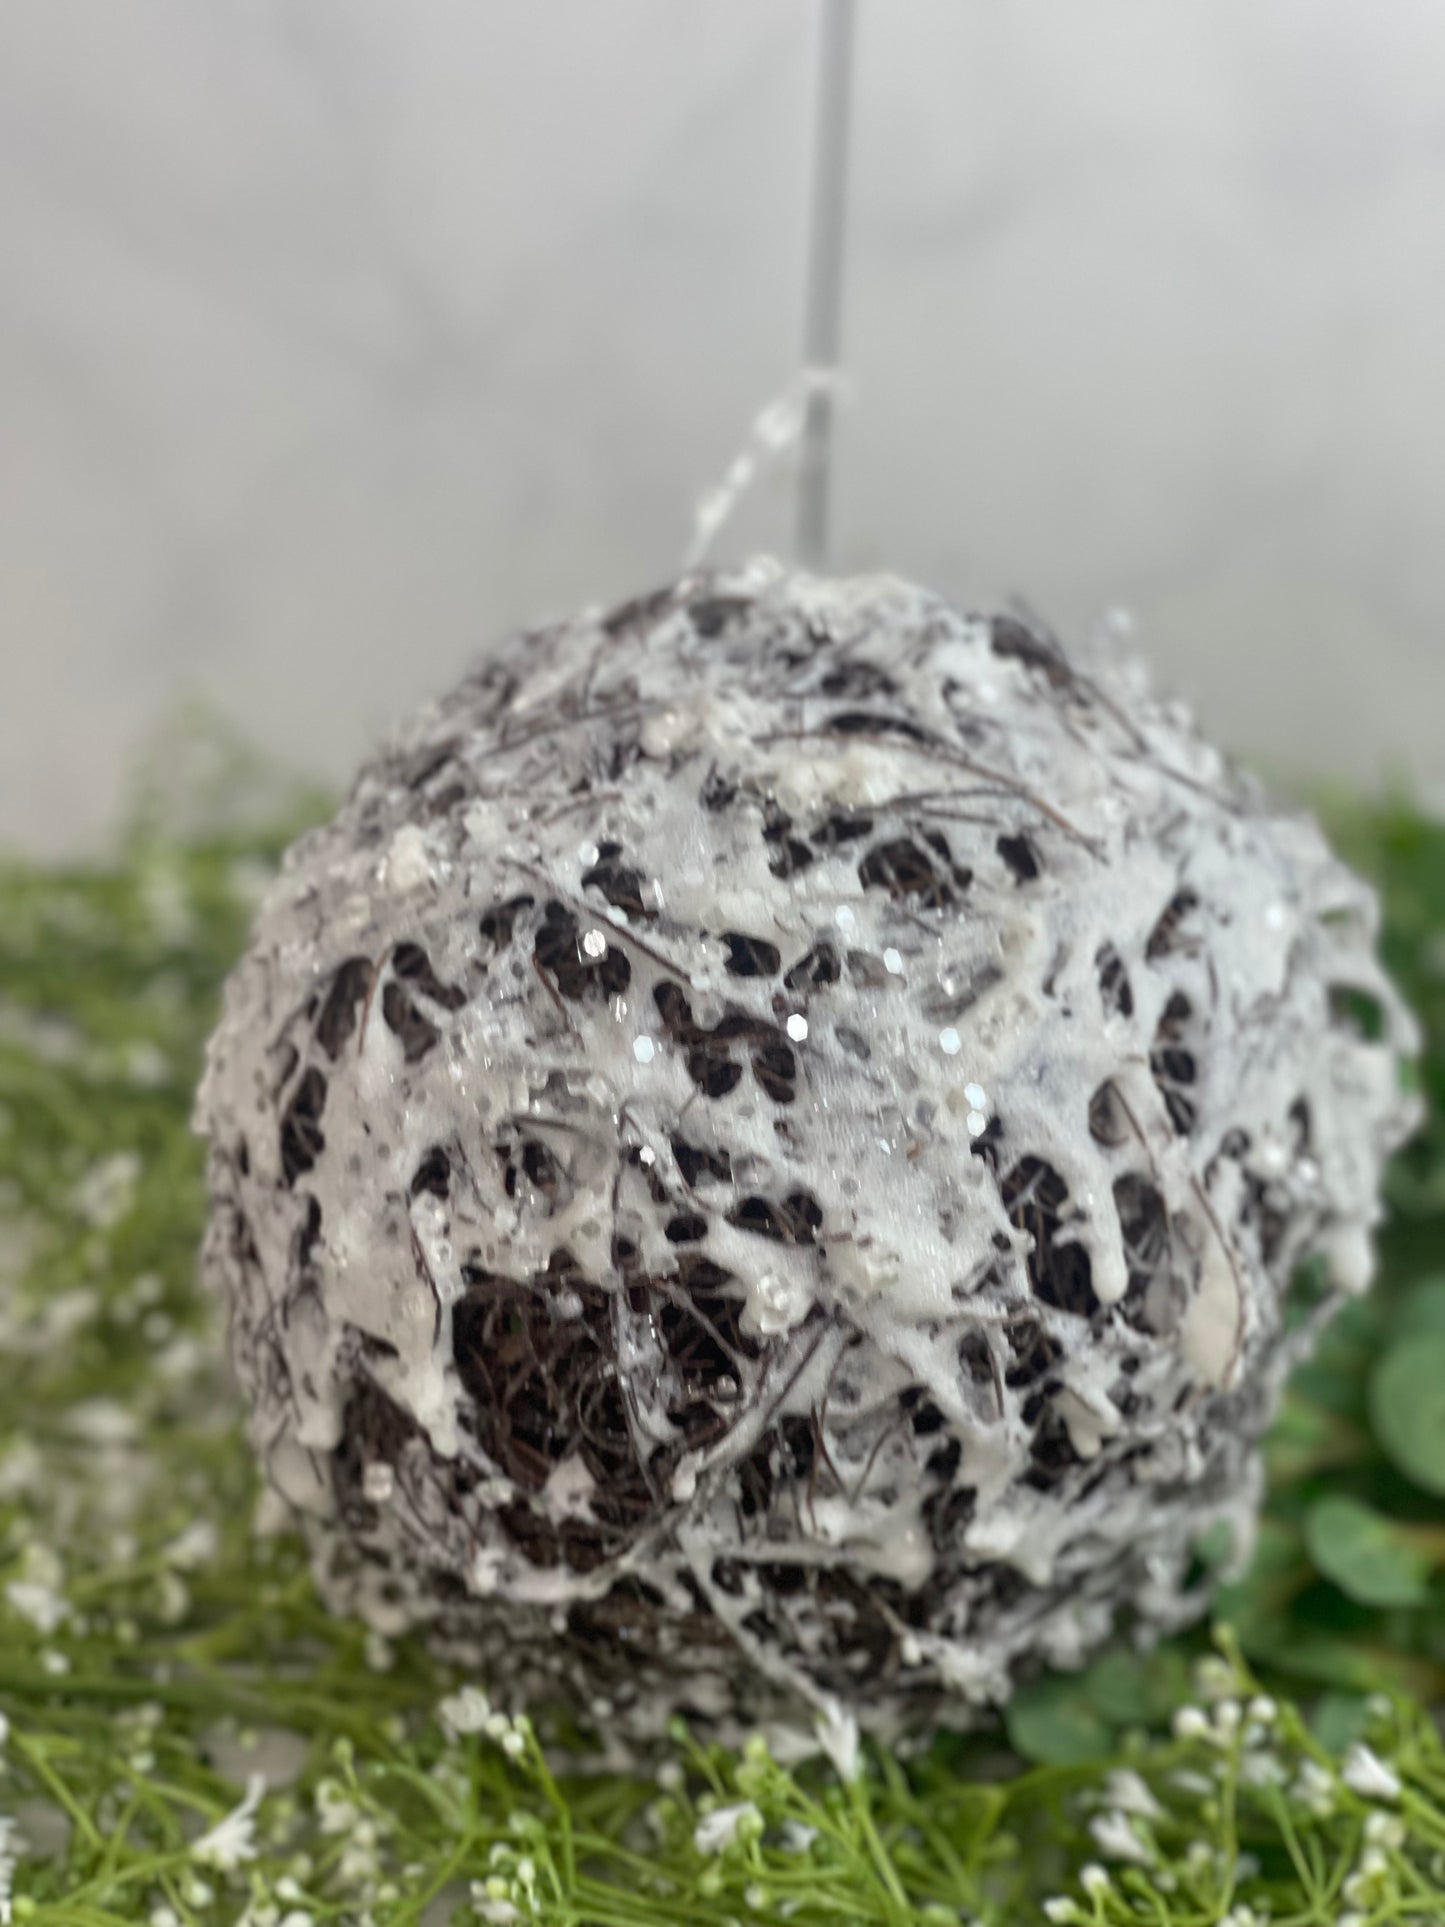 Snow And Ice Covered Twig Ornament Ball